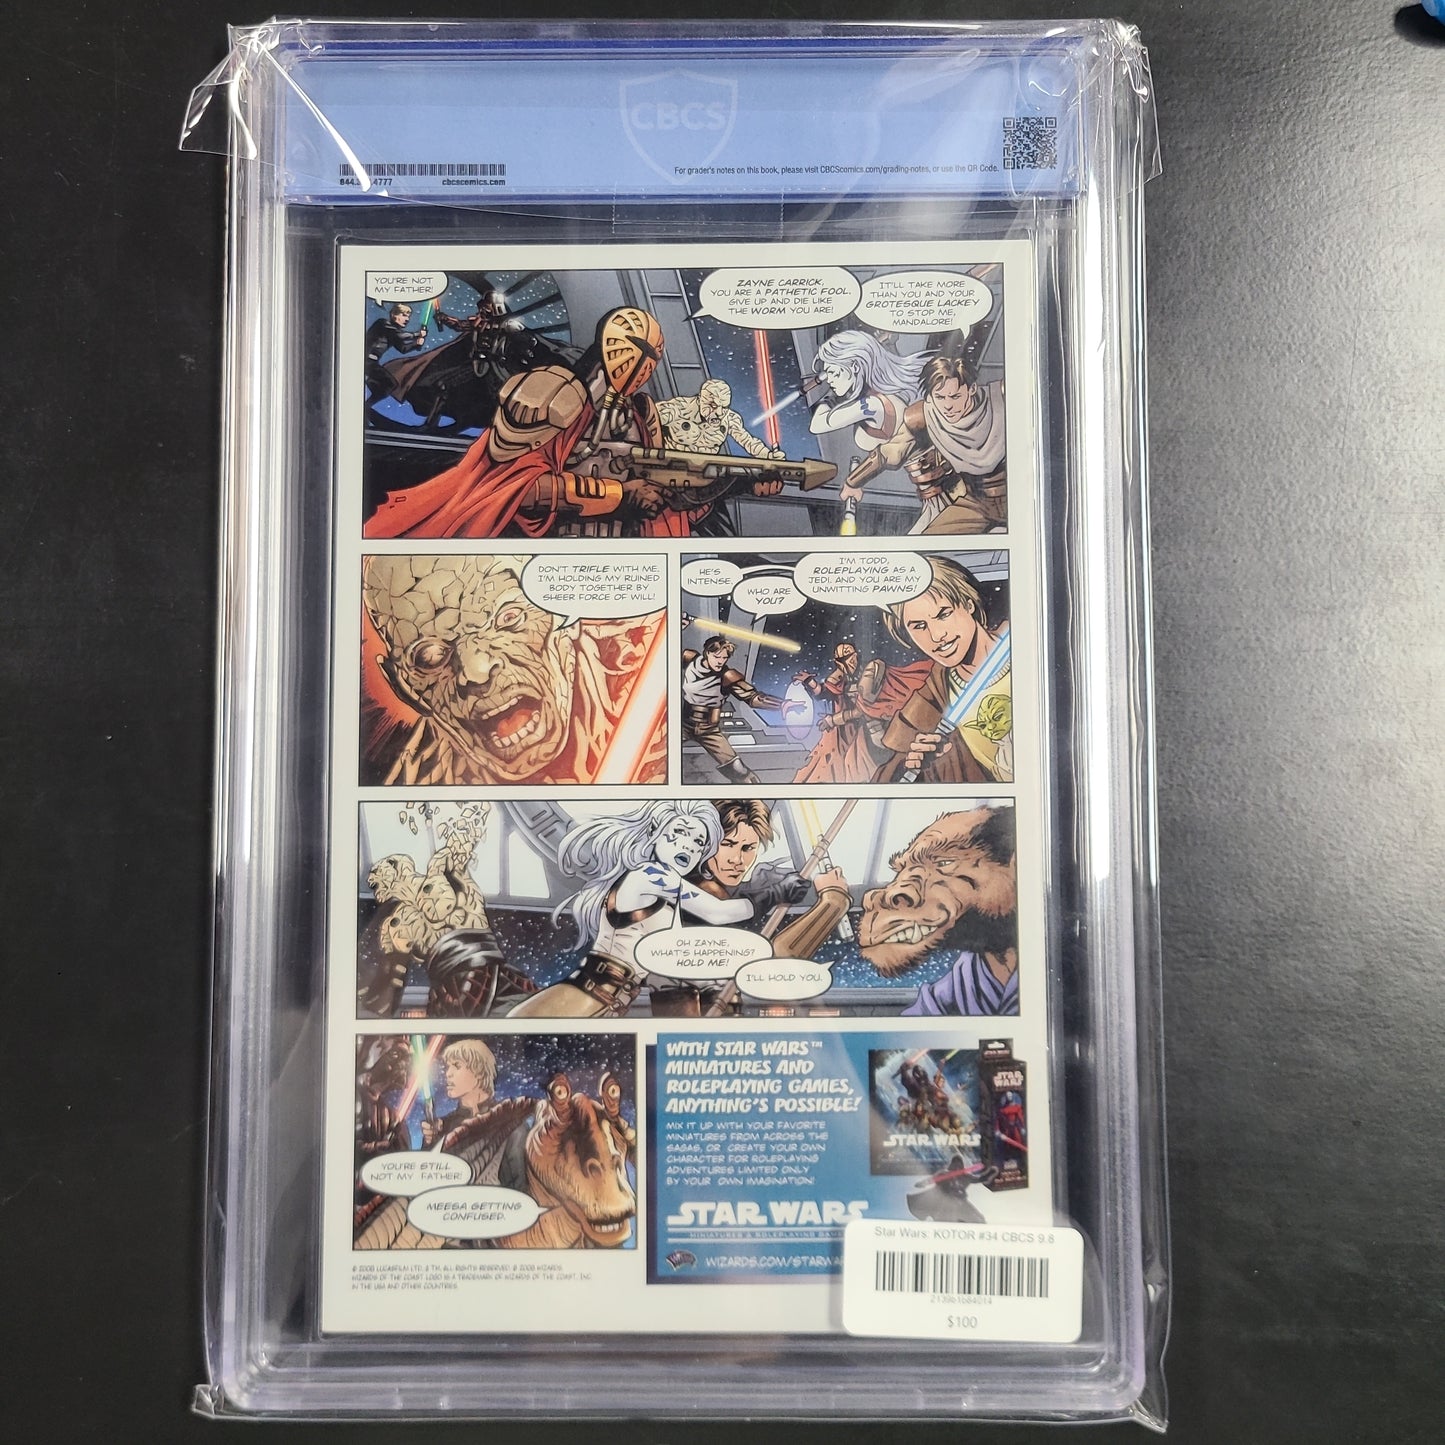 Knights of the Old Republic #34 CBCS 9.8